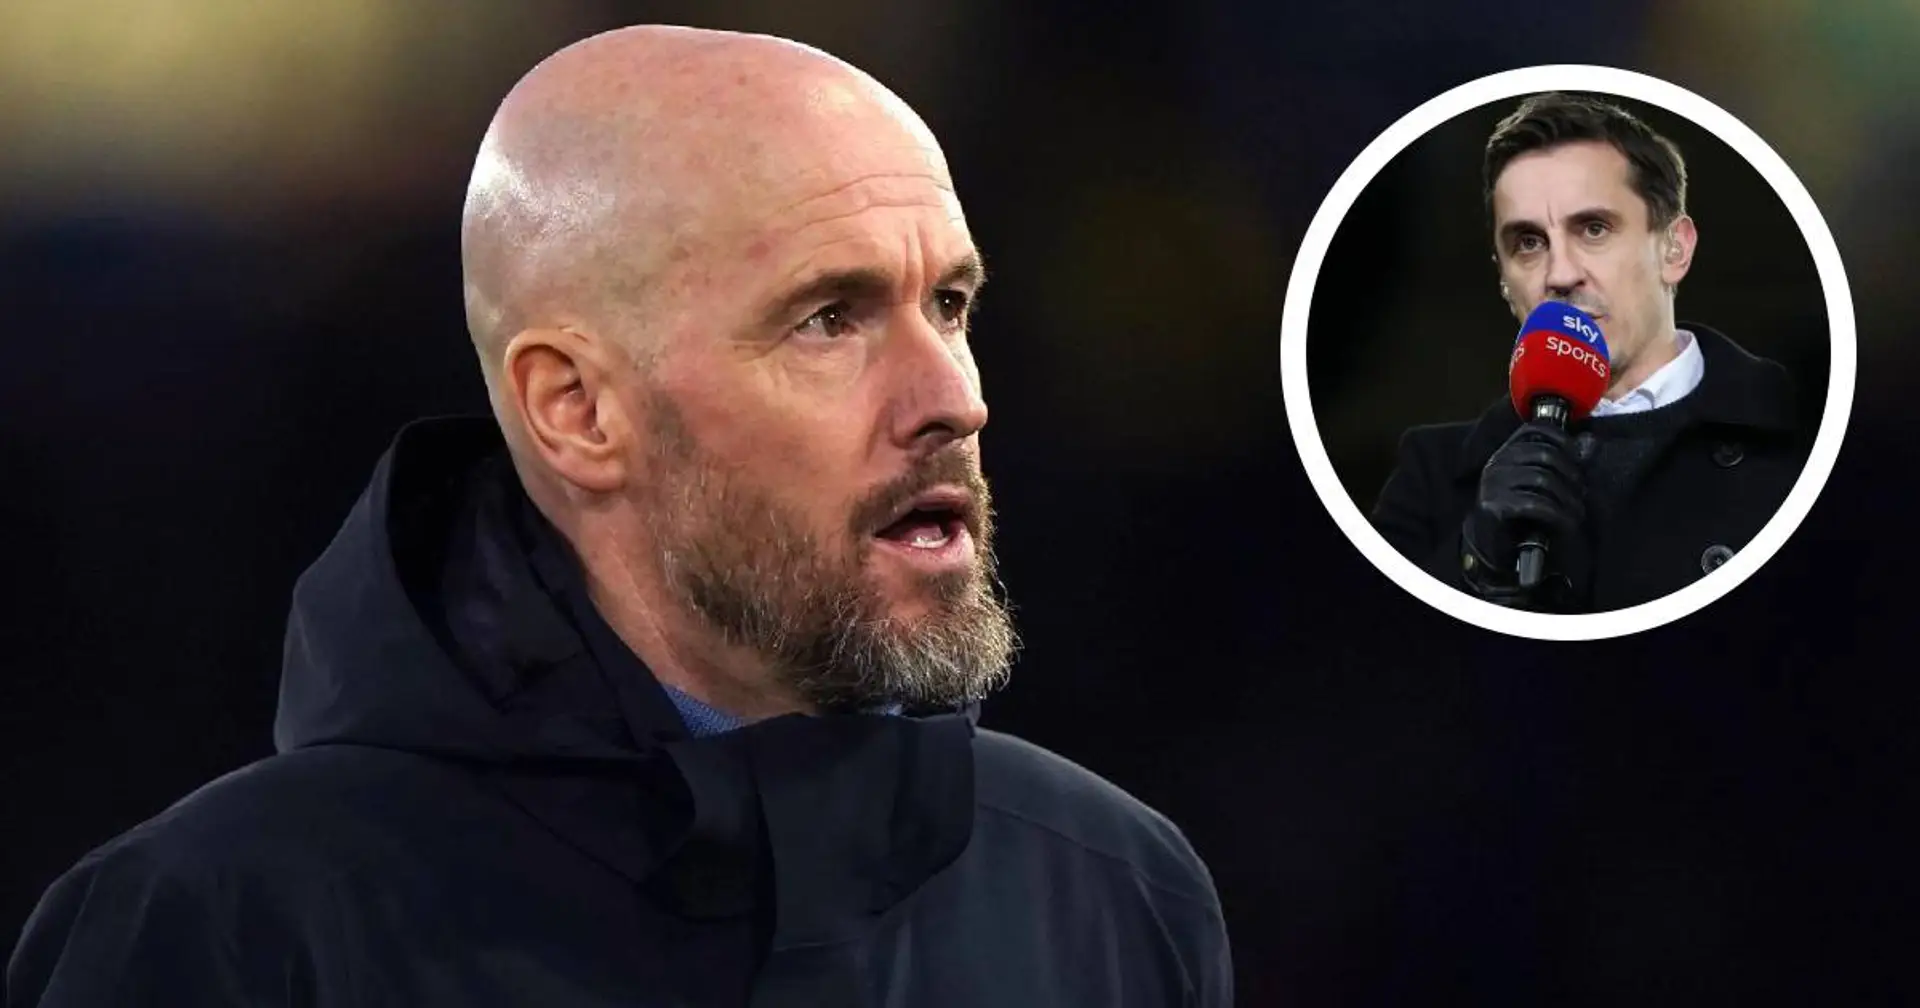 'They already know': Gary Neville has interesting theory about Ten Hag's future